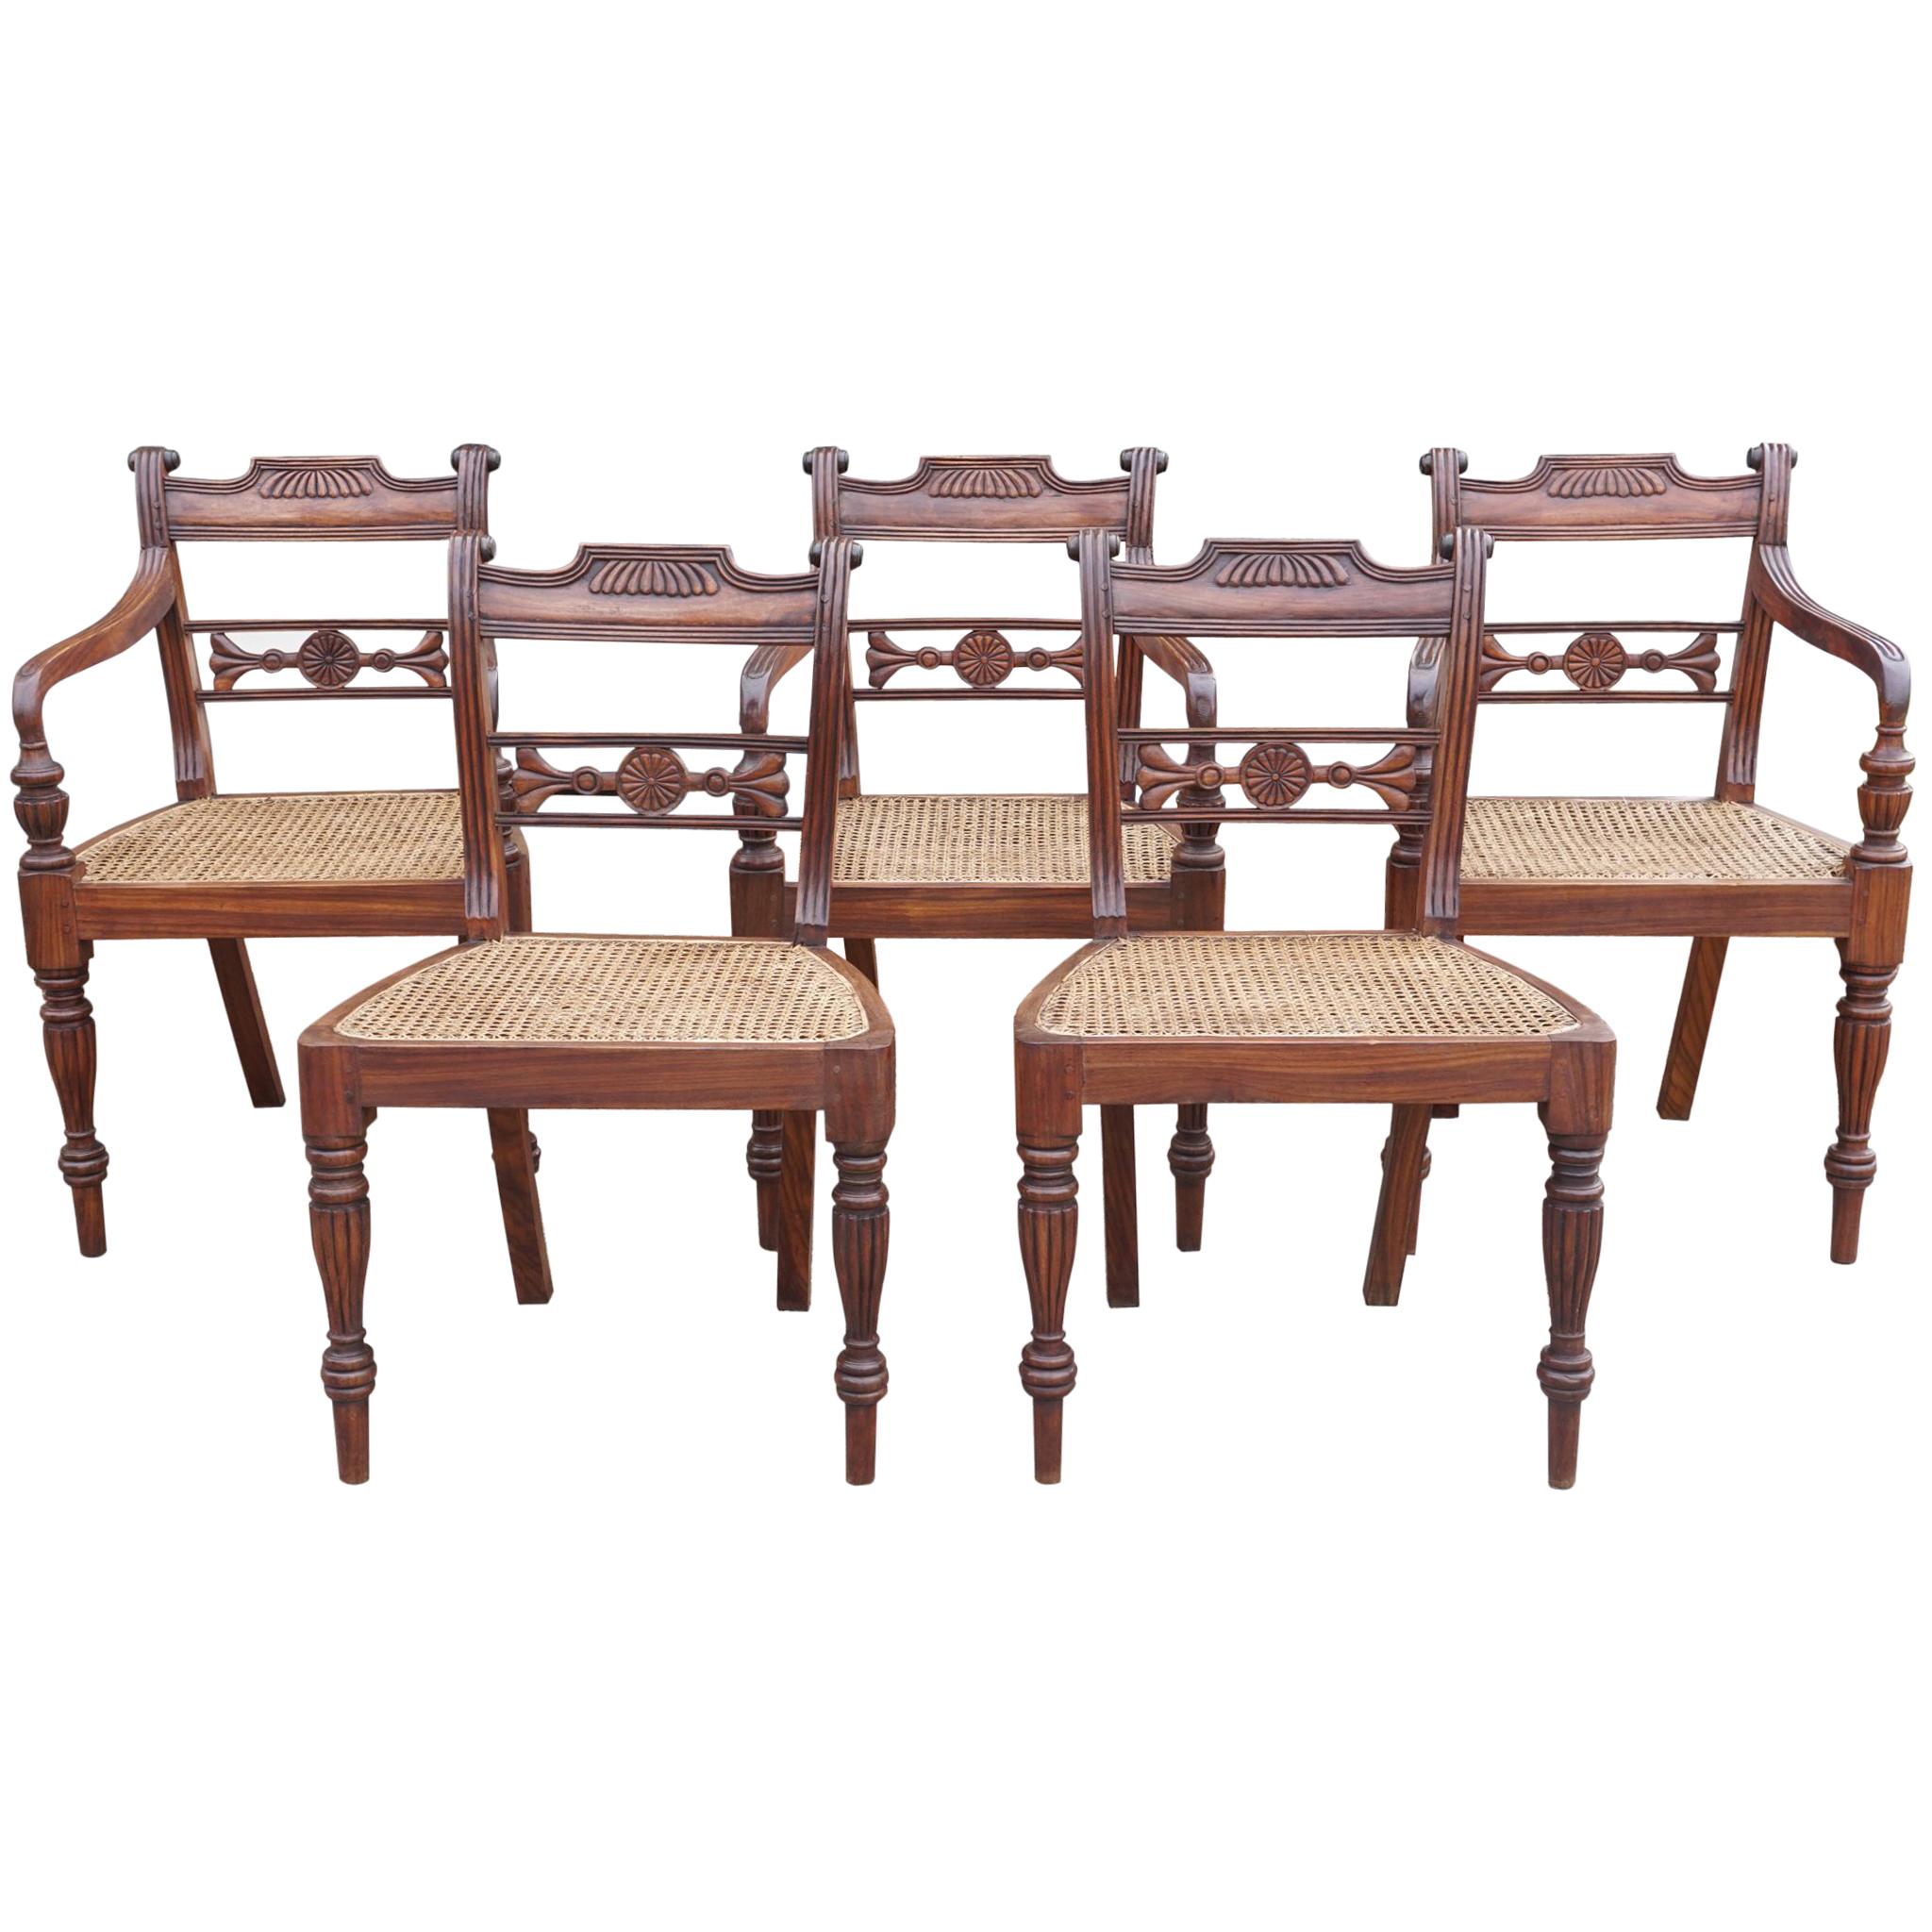 Set of Ten Regency Style Anglo-Indian Chairs